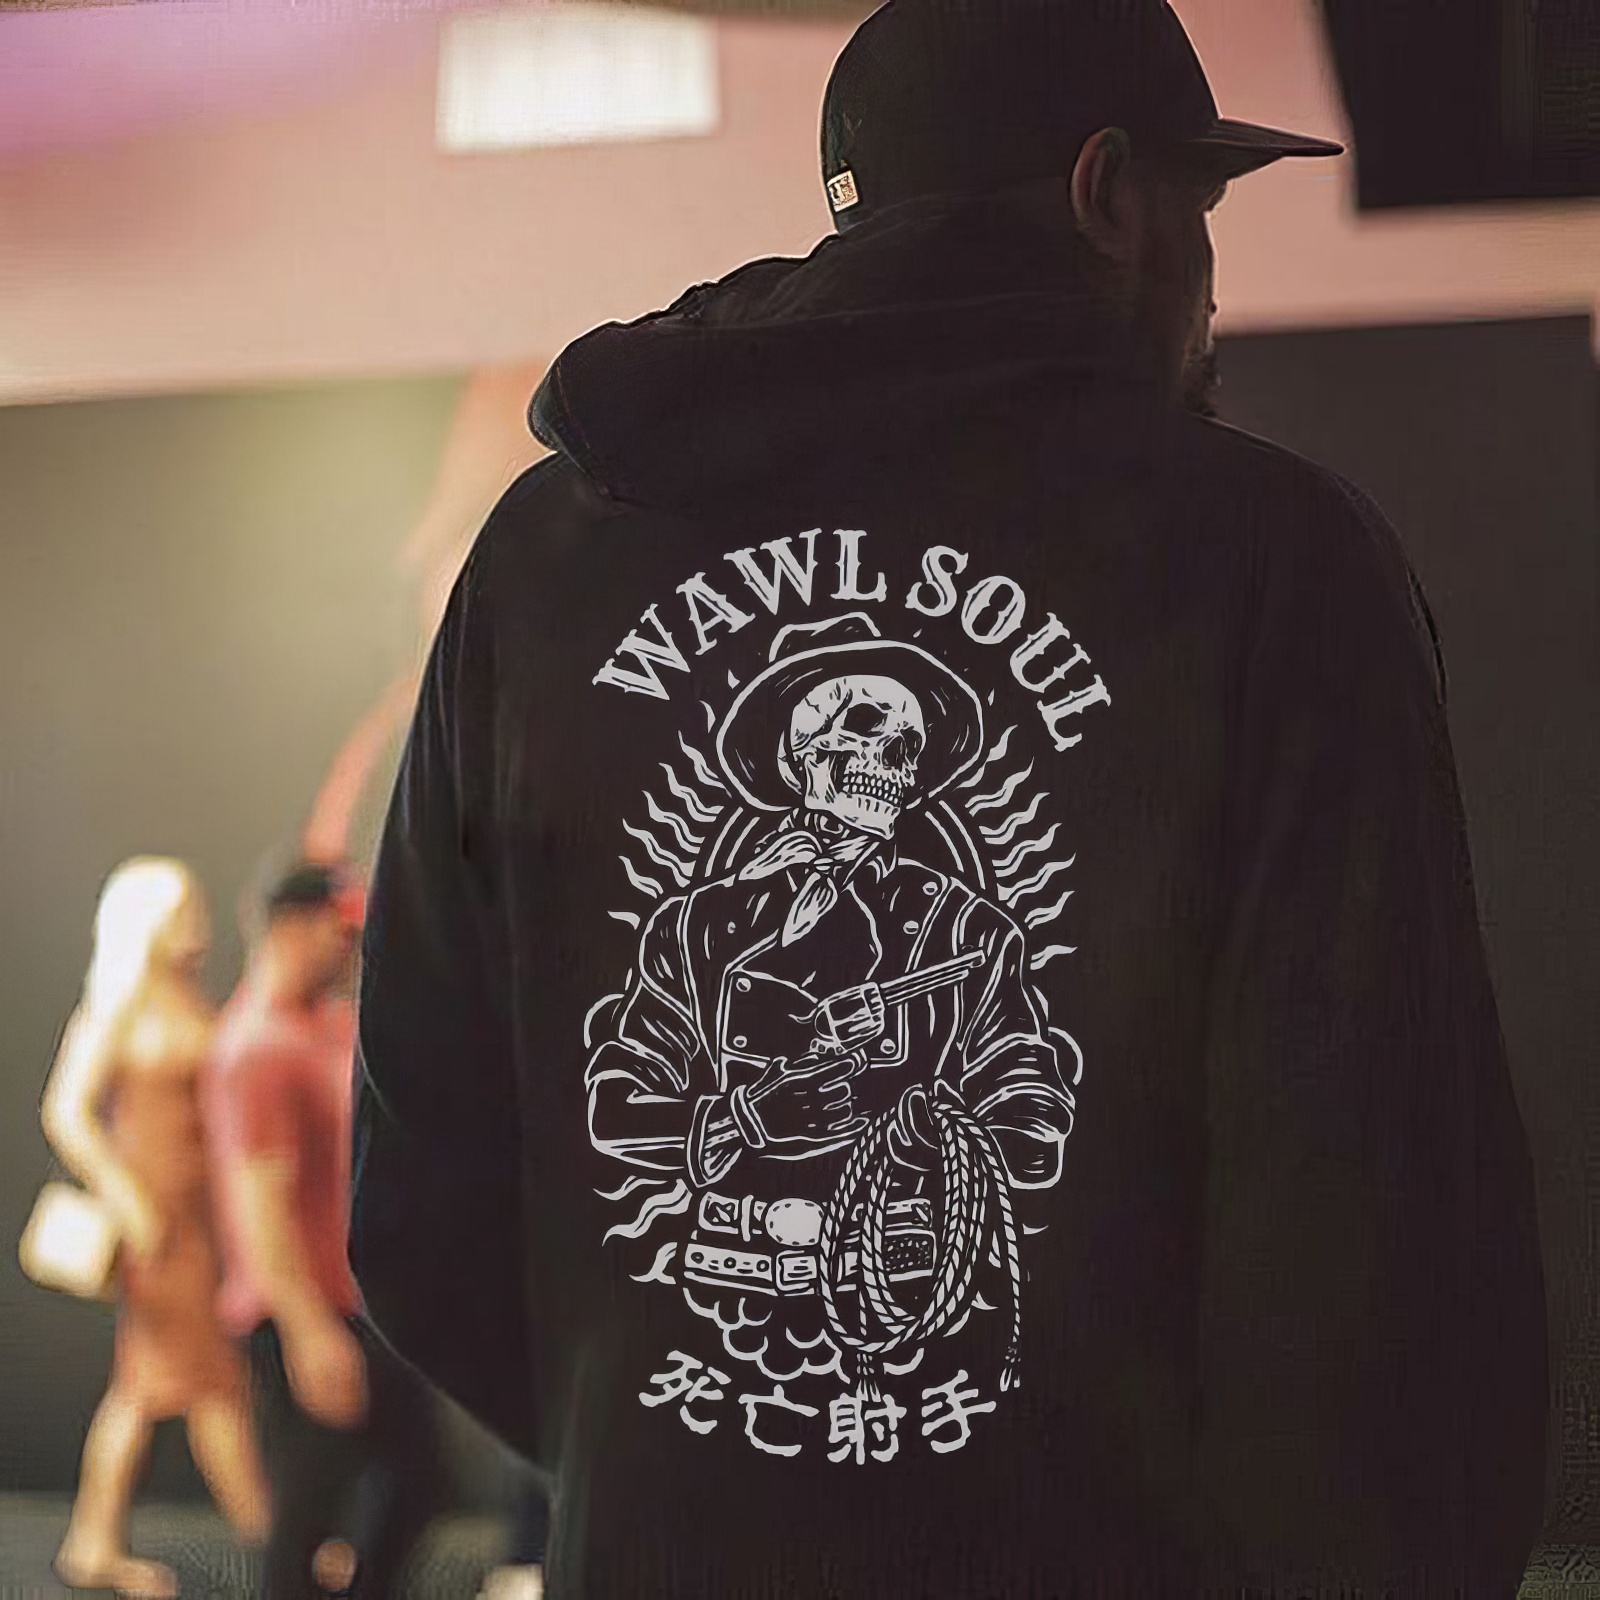 Tattoo inspired clothing: Death Shooter Hoodie-Wawl Soul